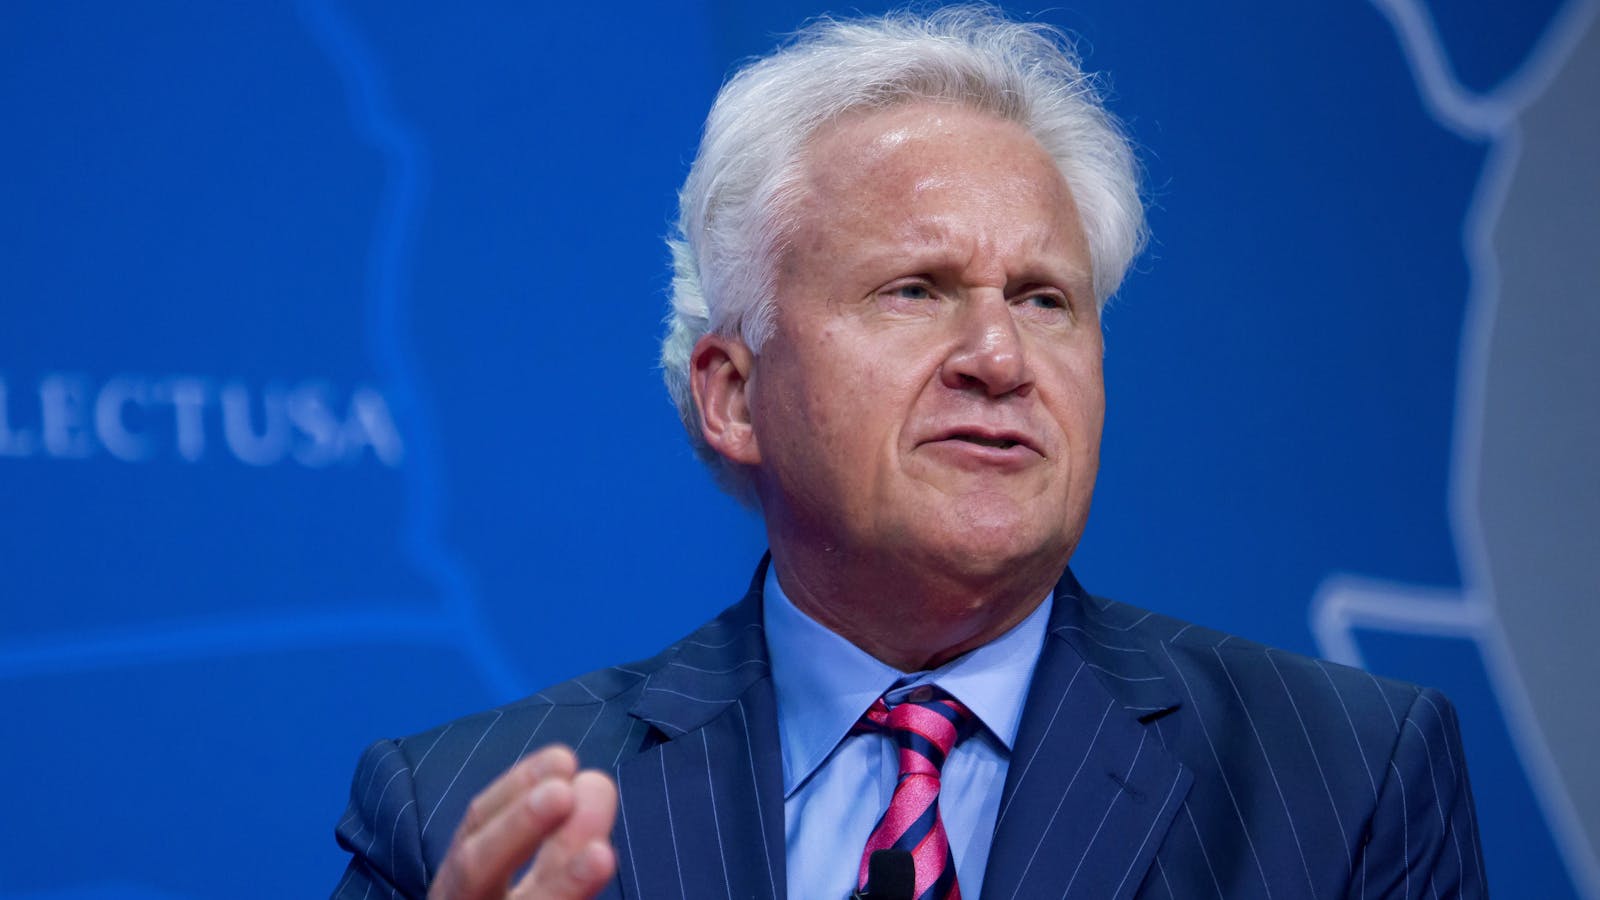 Former GE CEO Jeff Immelt. Photo by Bloomberg.